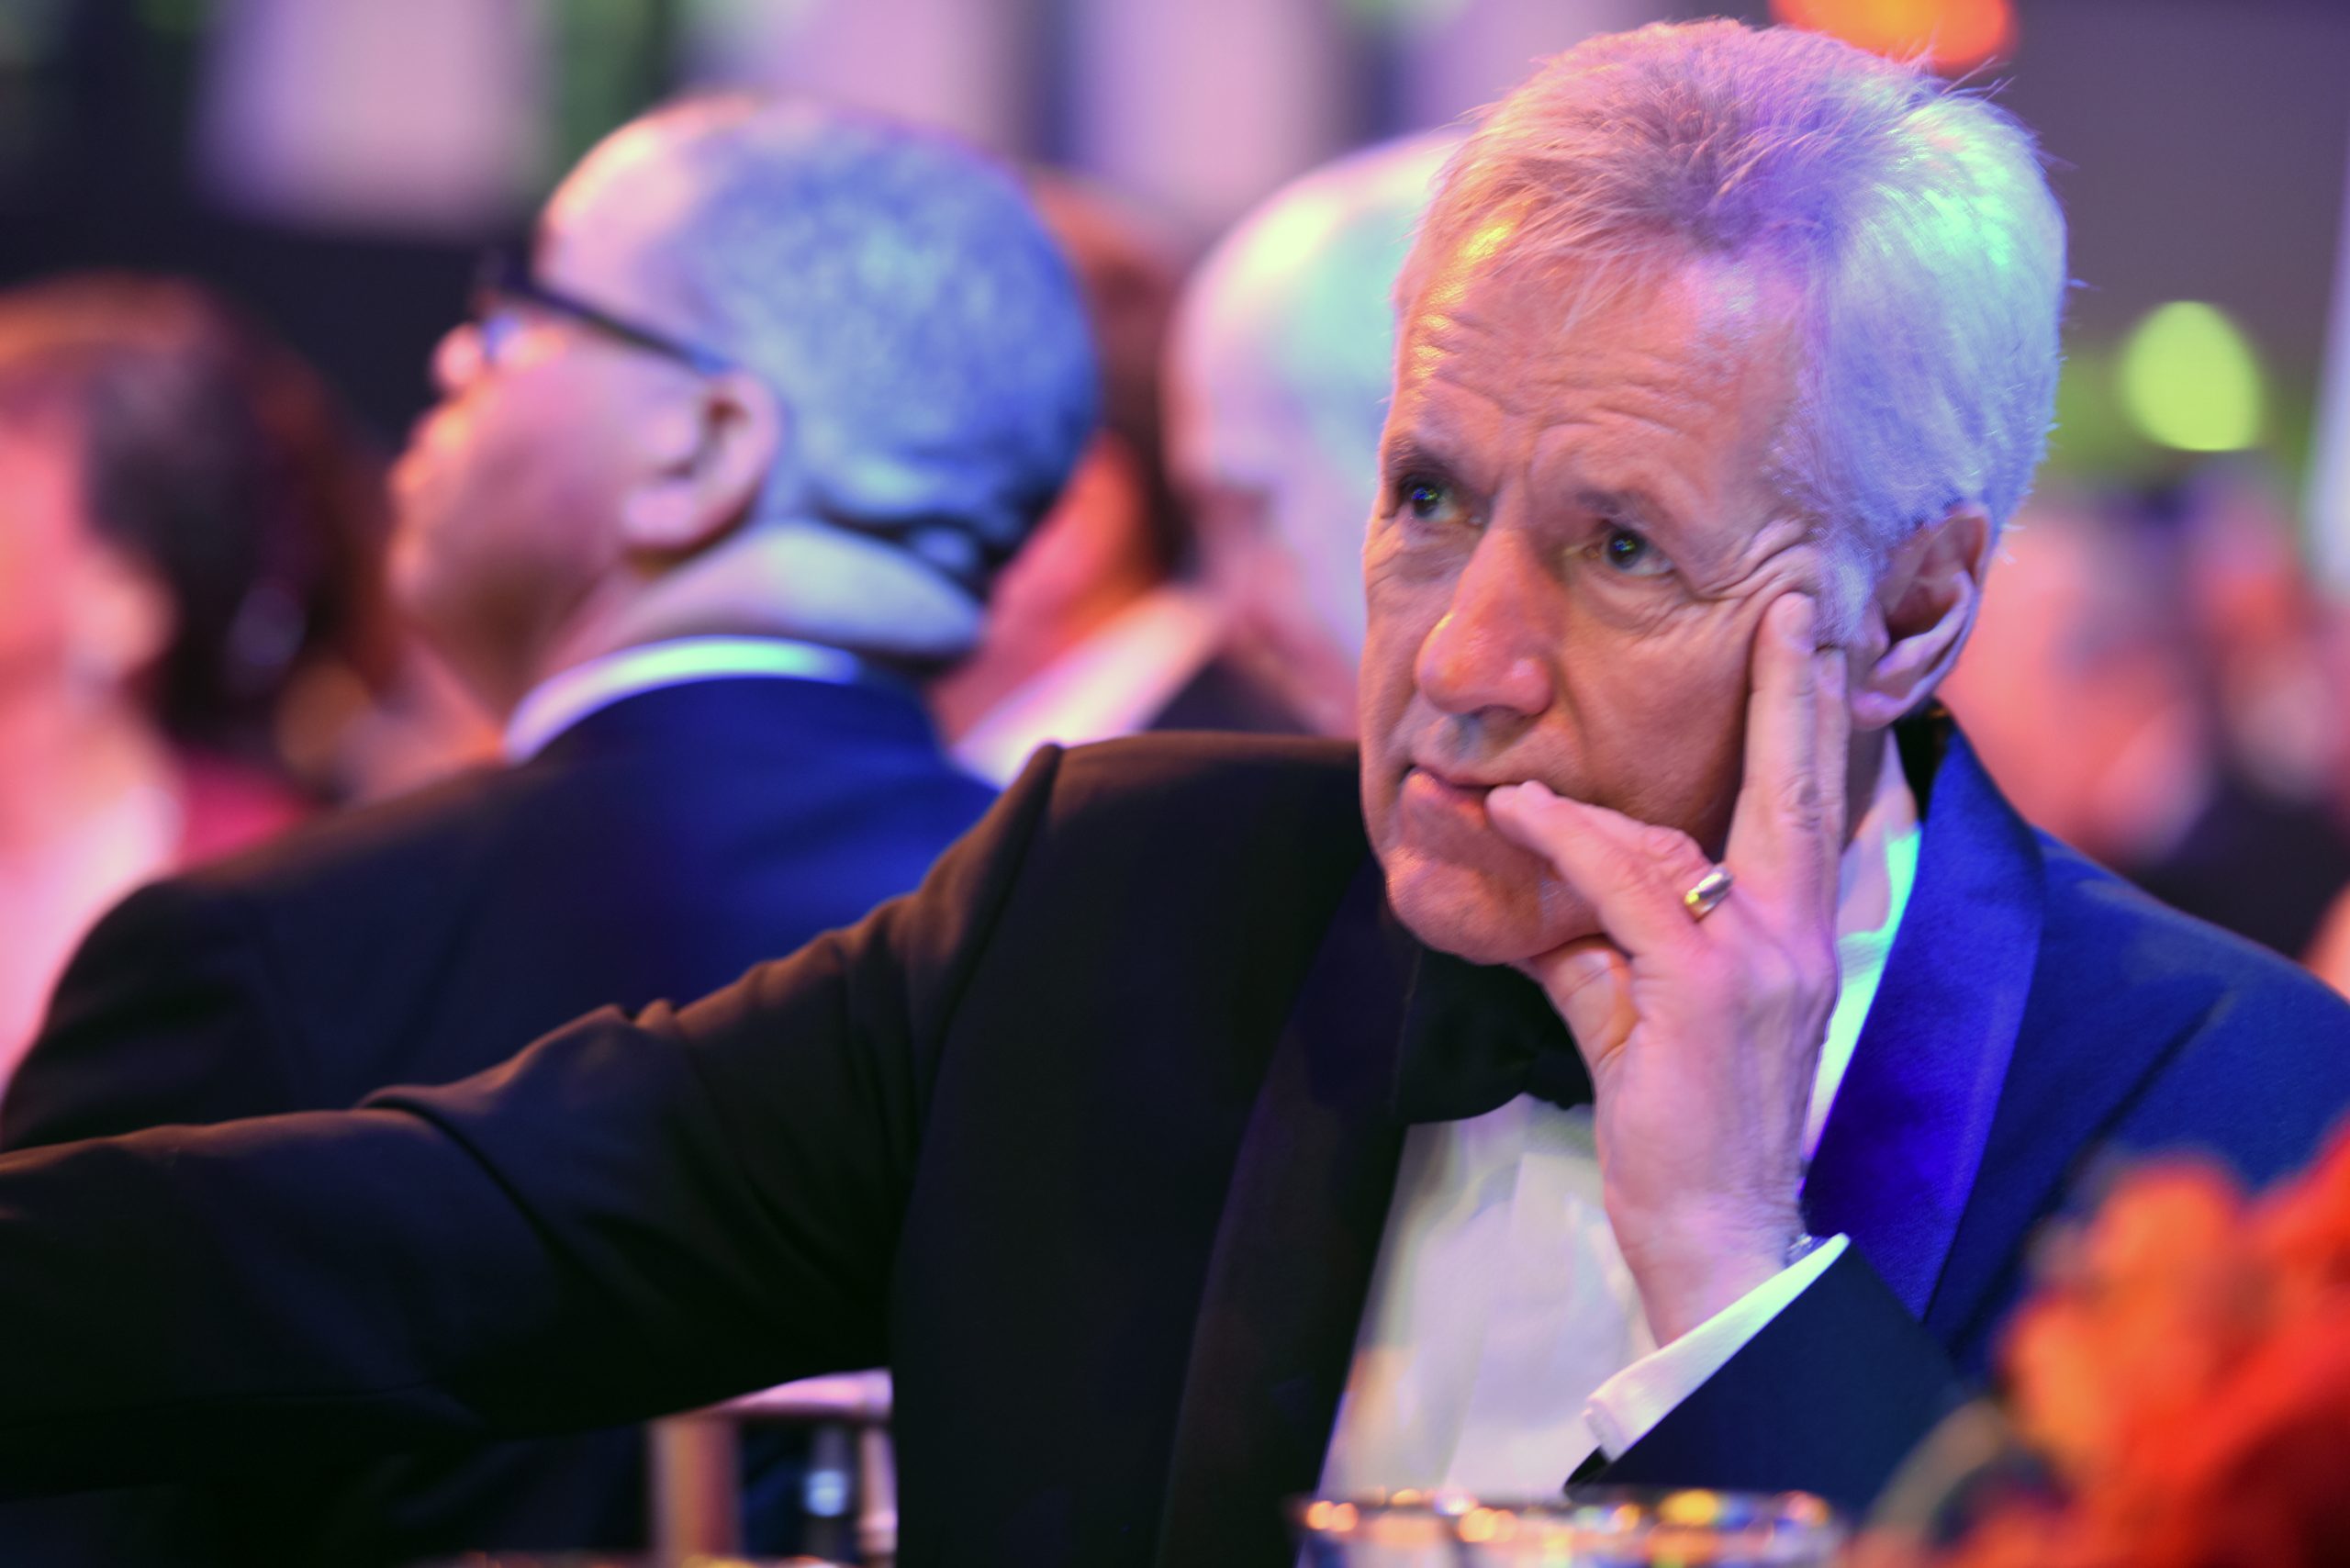 Alex Trebek's passing inspired Google to create a special easter egg in his honor